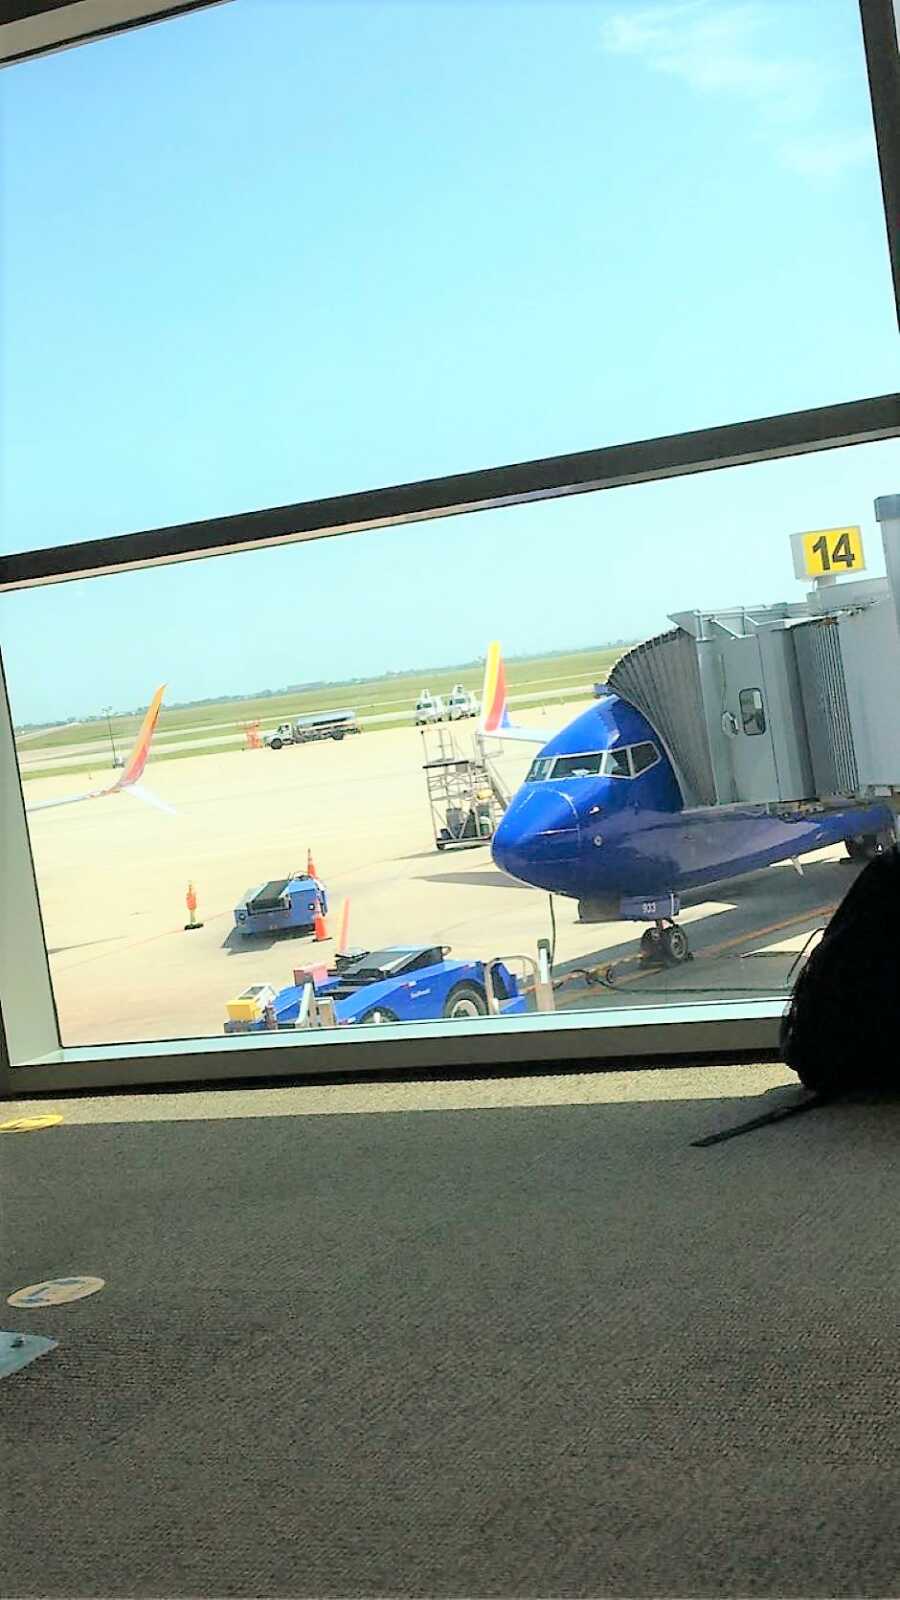 View from the inside of the airport of a Southwest Airline plane boarding 